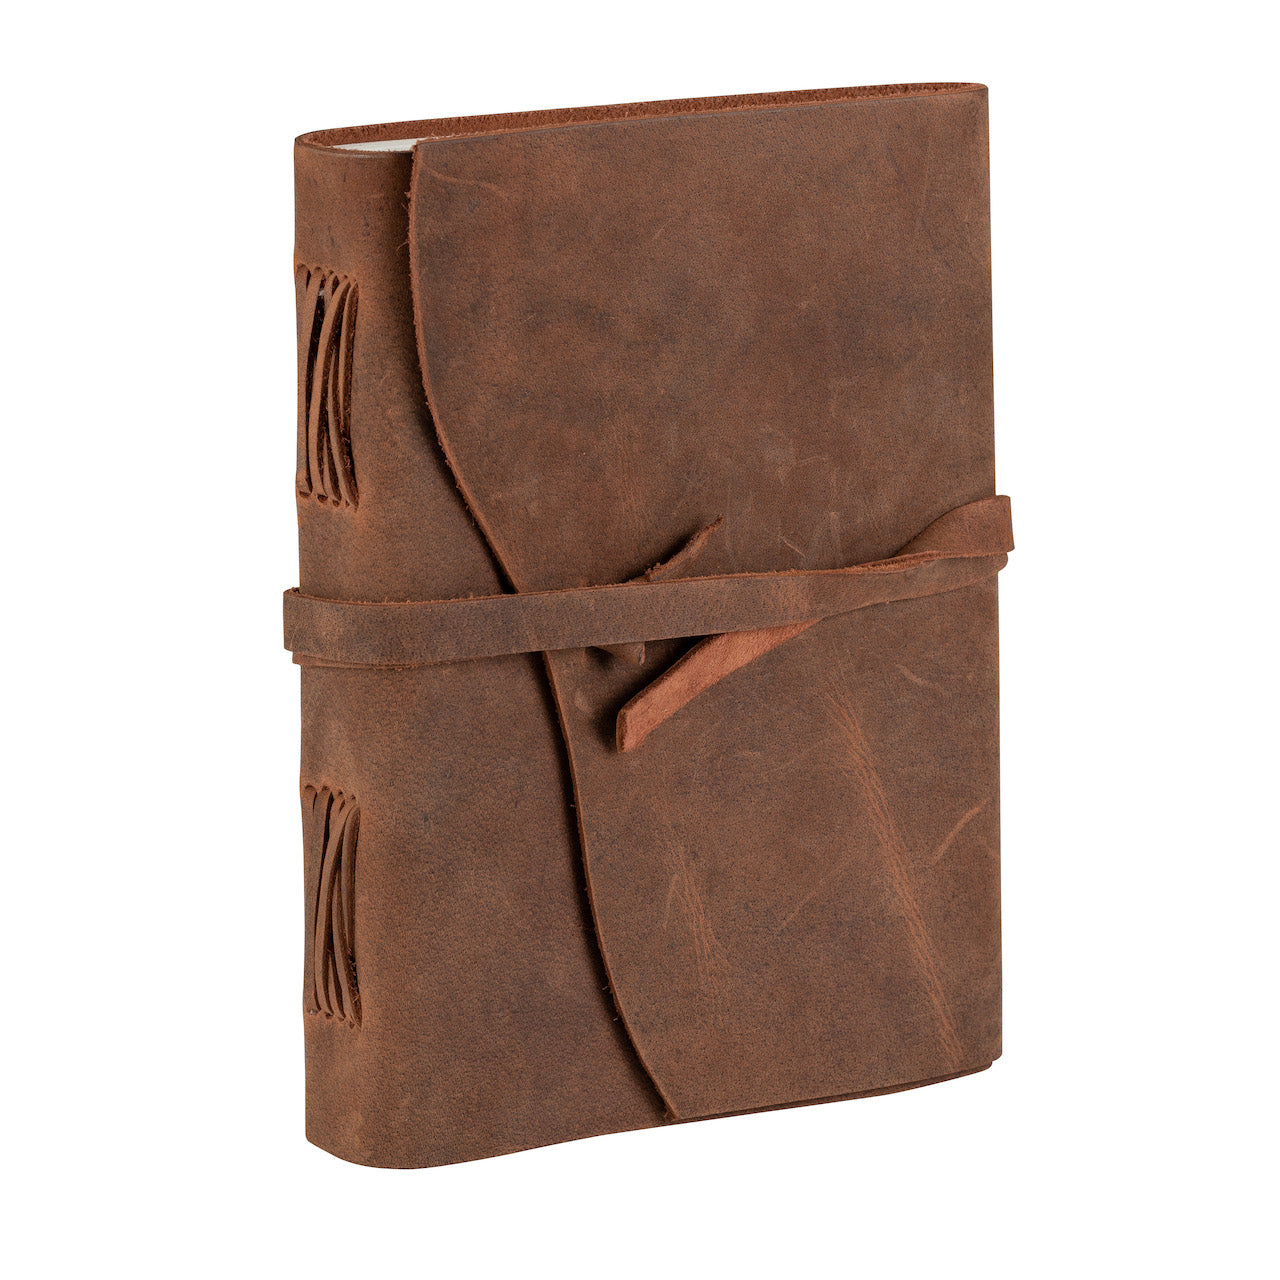 Tuk Tuk Press Antique Light Tan Buffalo Leather Journal. Journal has a full strap and is closed.